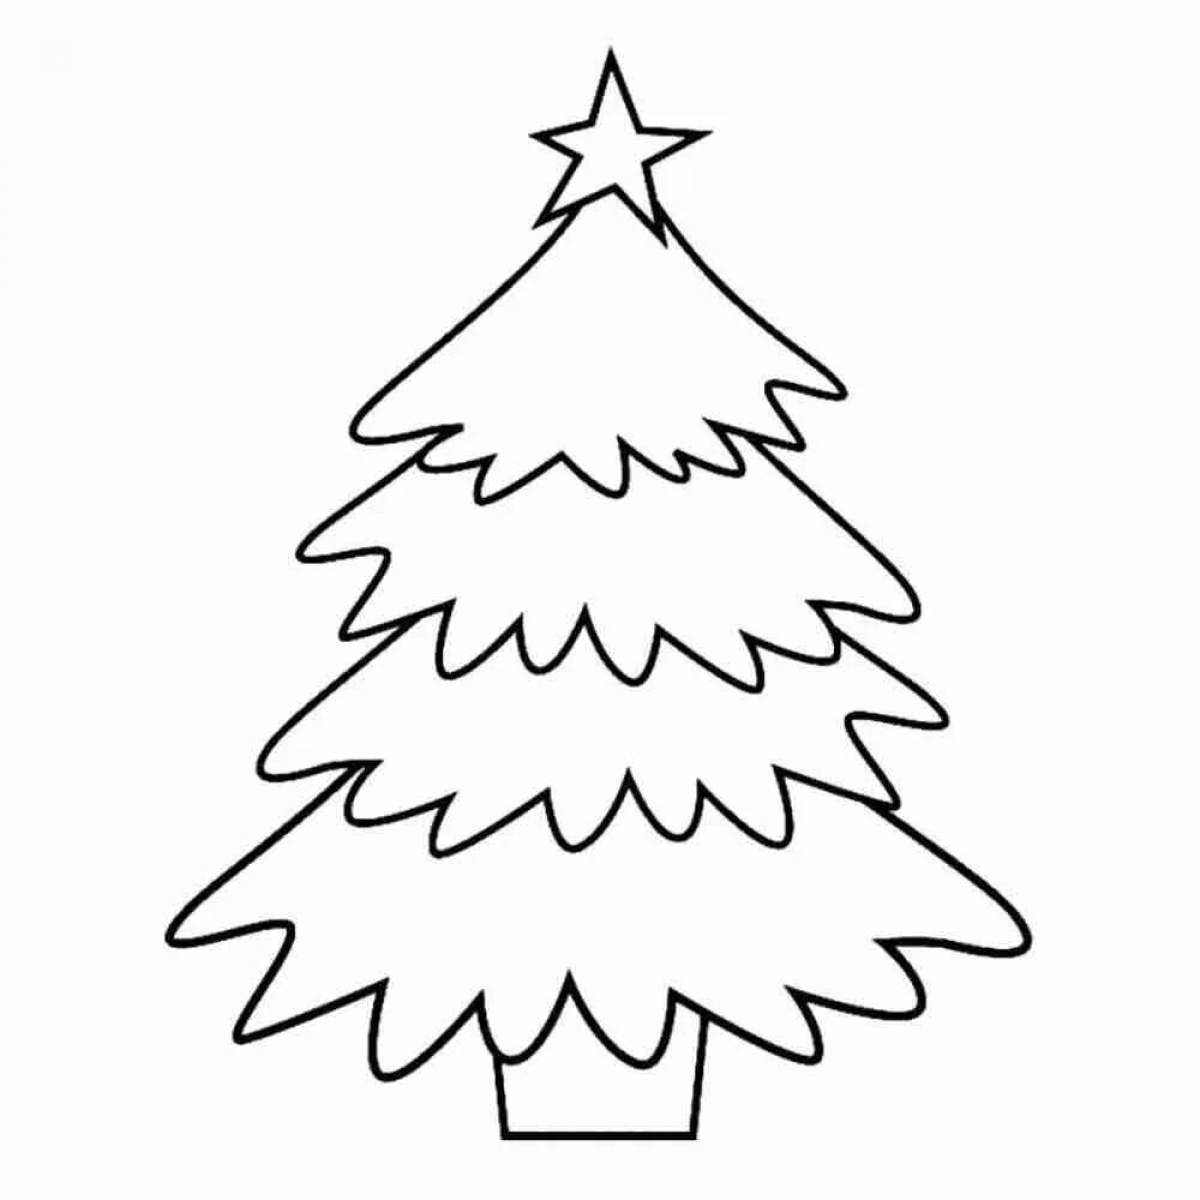 Christmas tree coloring with color explosion for kids